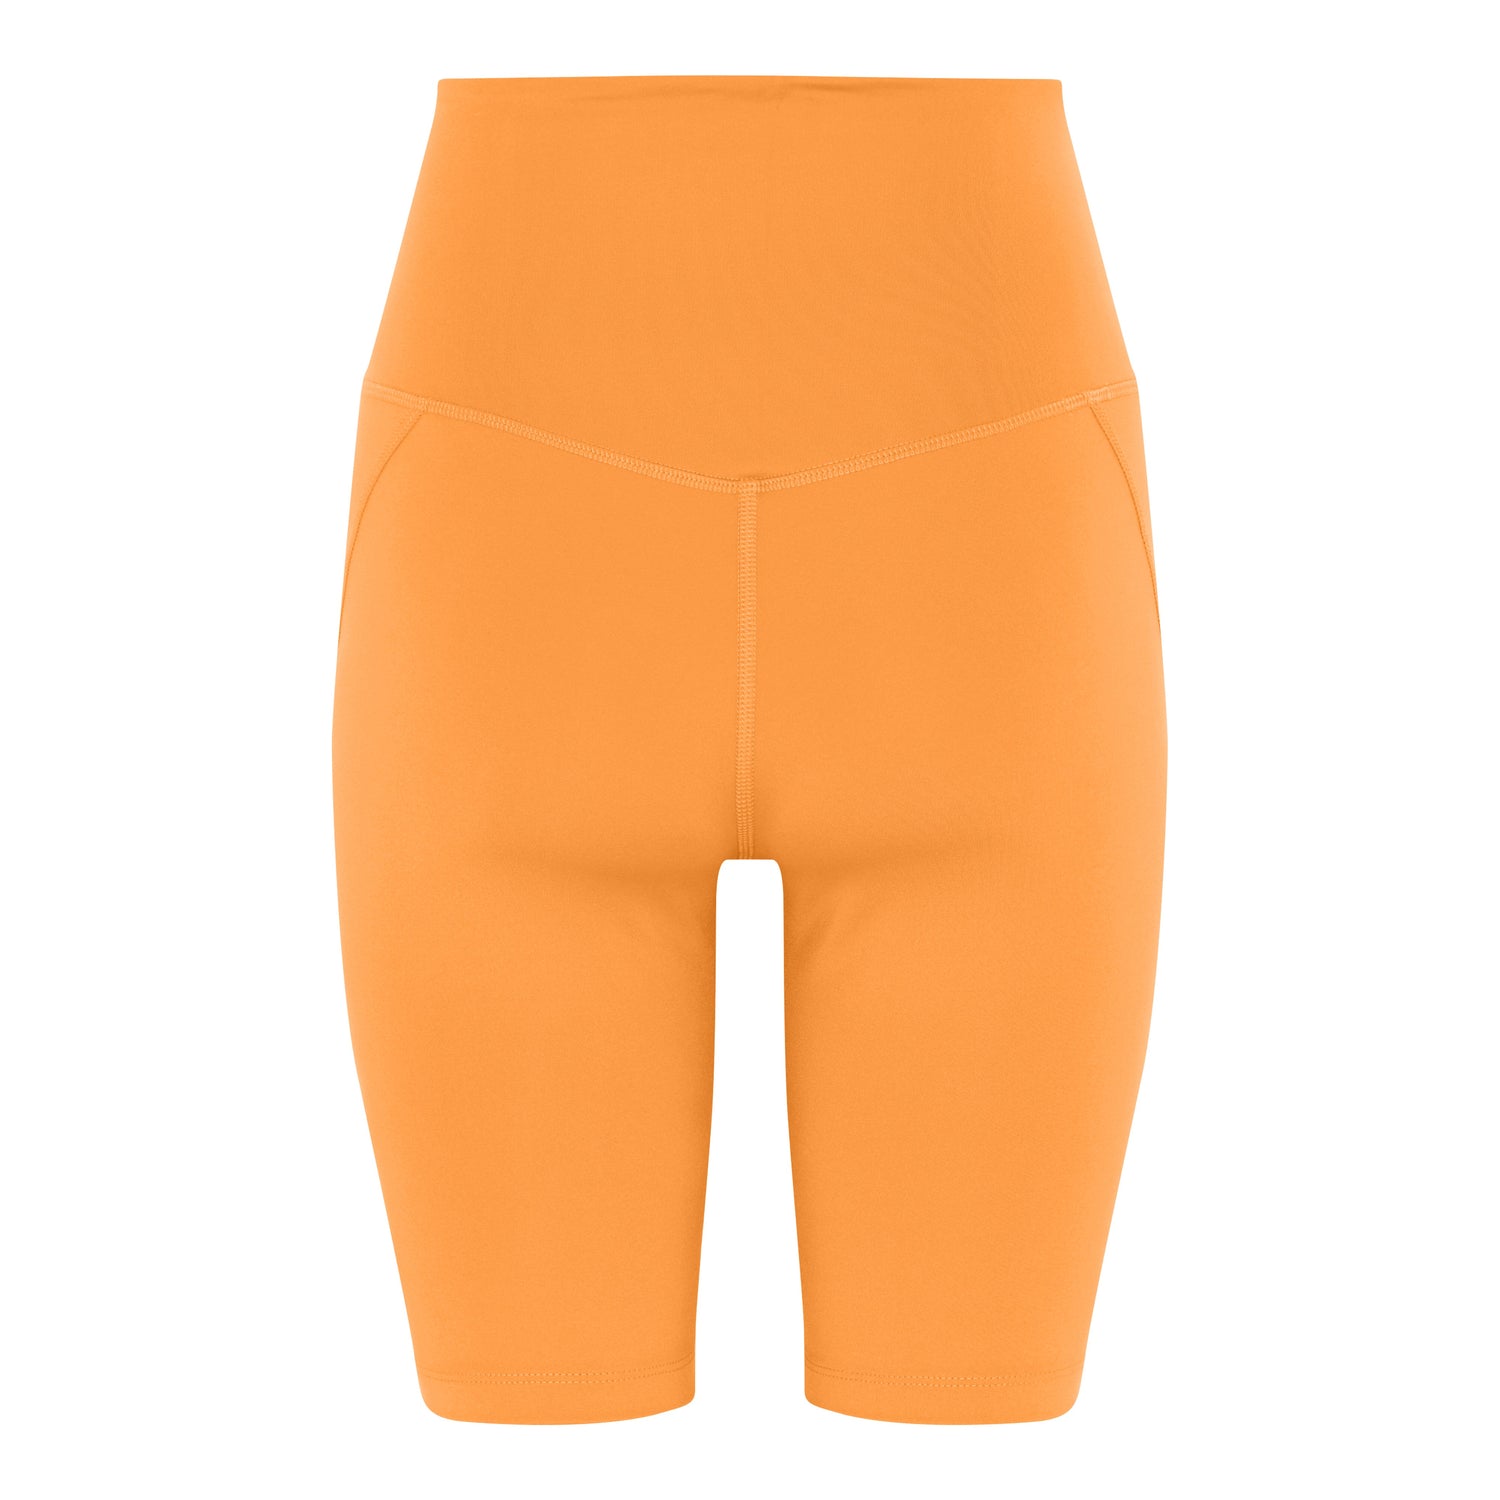 Girlfriend Collective Bike Shorts - Made from recycled plastic bottles Orange Zest Pants